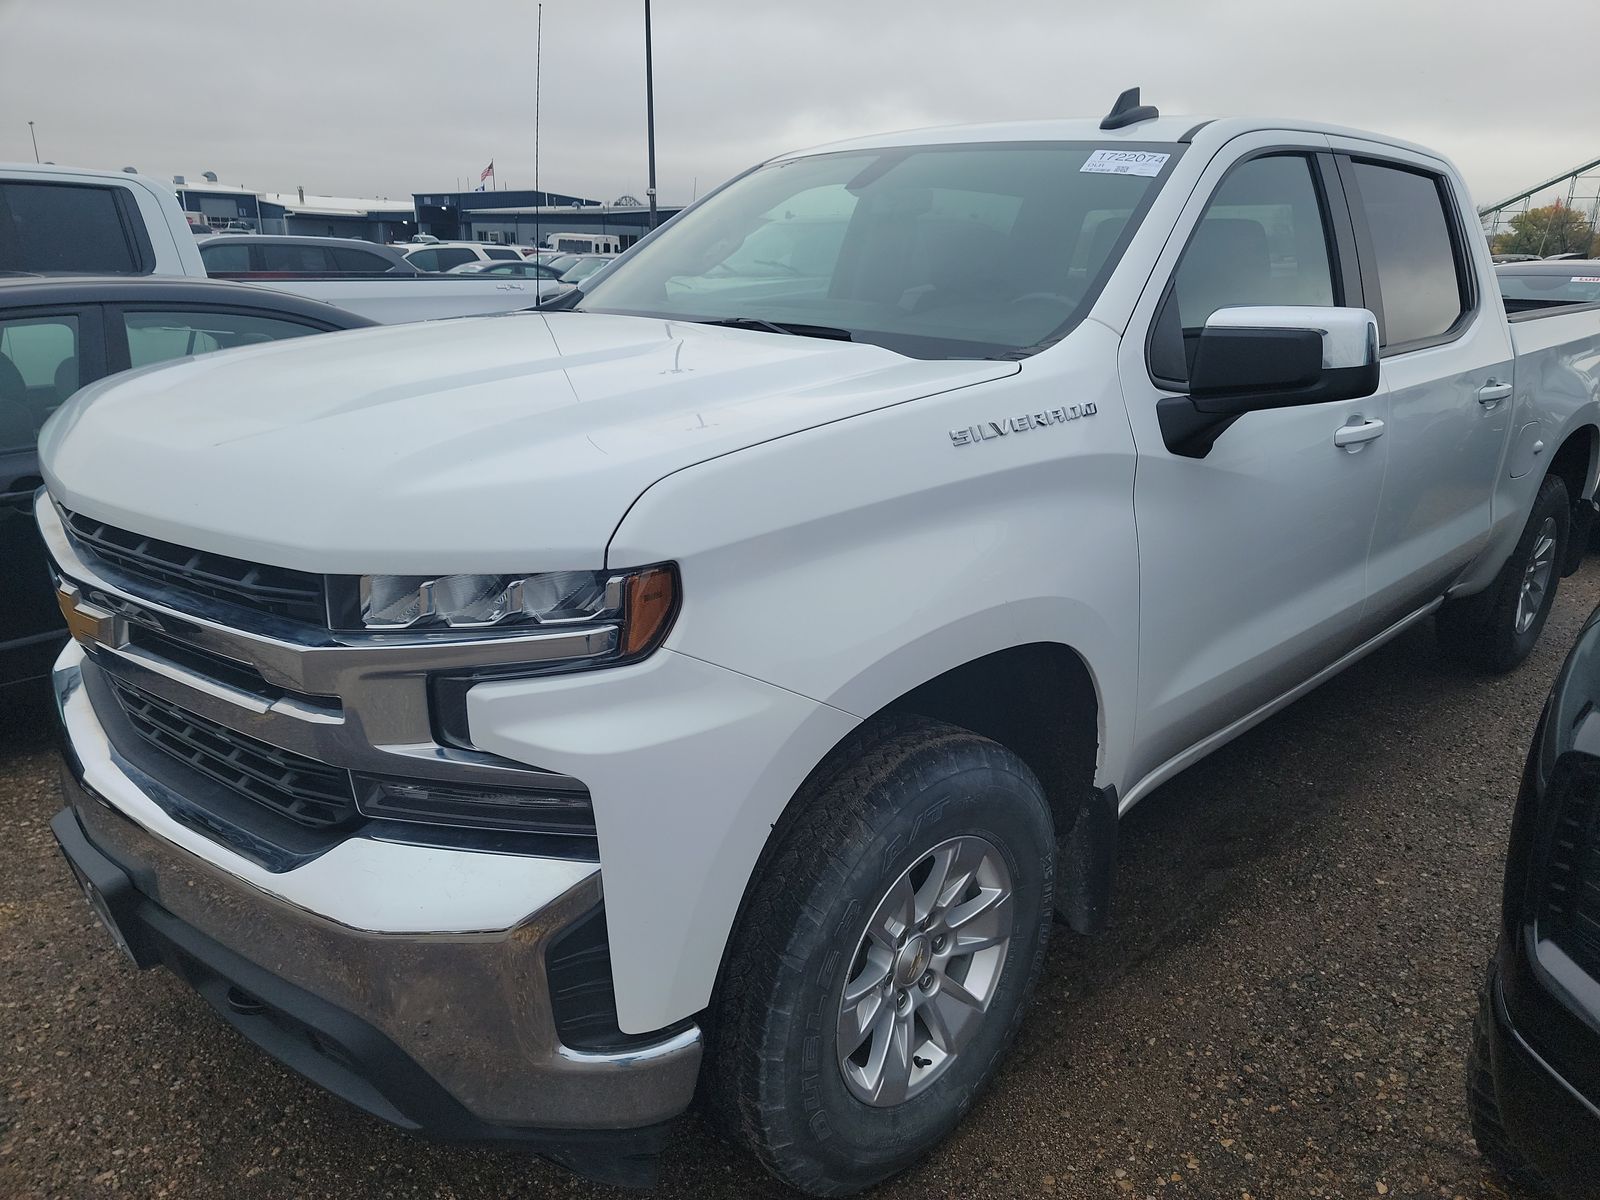 Used 2021 Chevrolet Silverado 1500 LT with VIN 1GCUYDED6MZ407318 for sale in Minneapolis, Minnesota